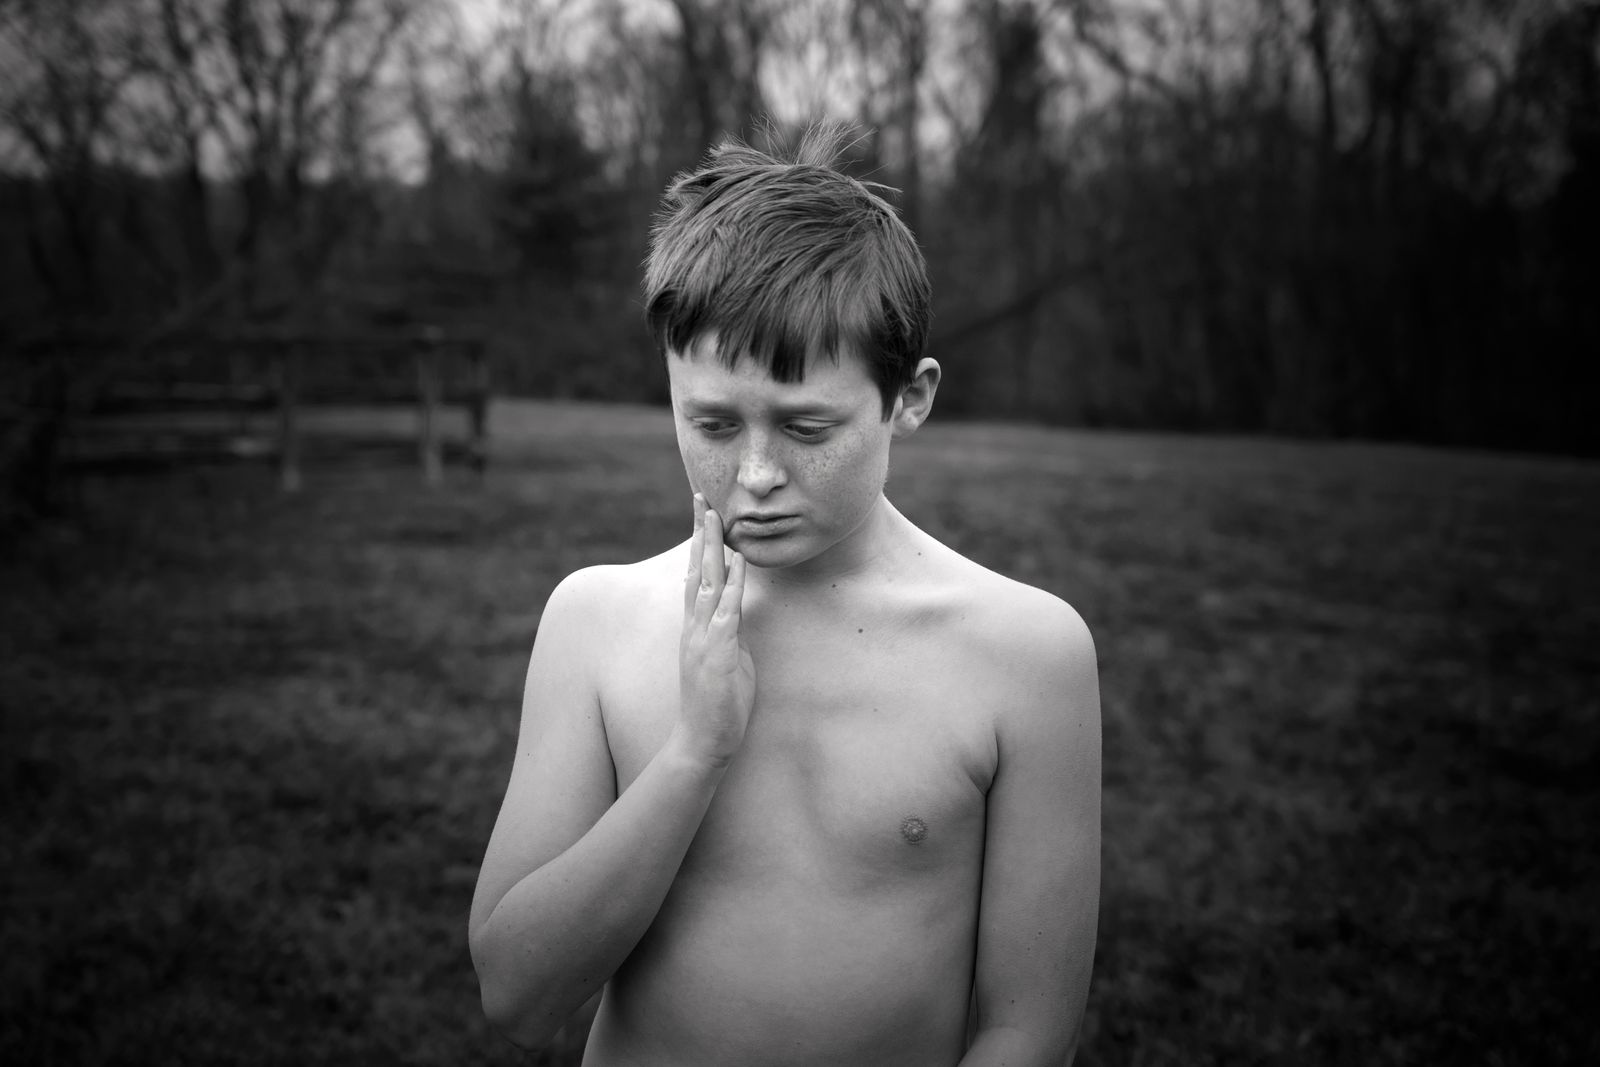 © Rebecca Moseman - Image from the A Preteen Quarantine photography project